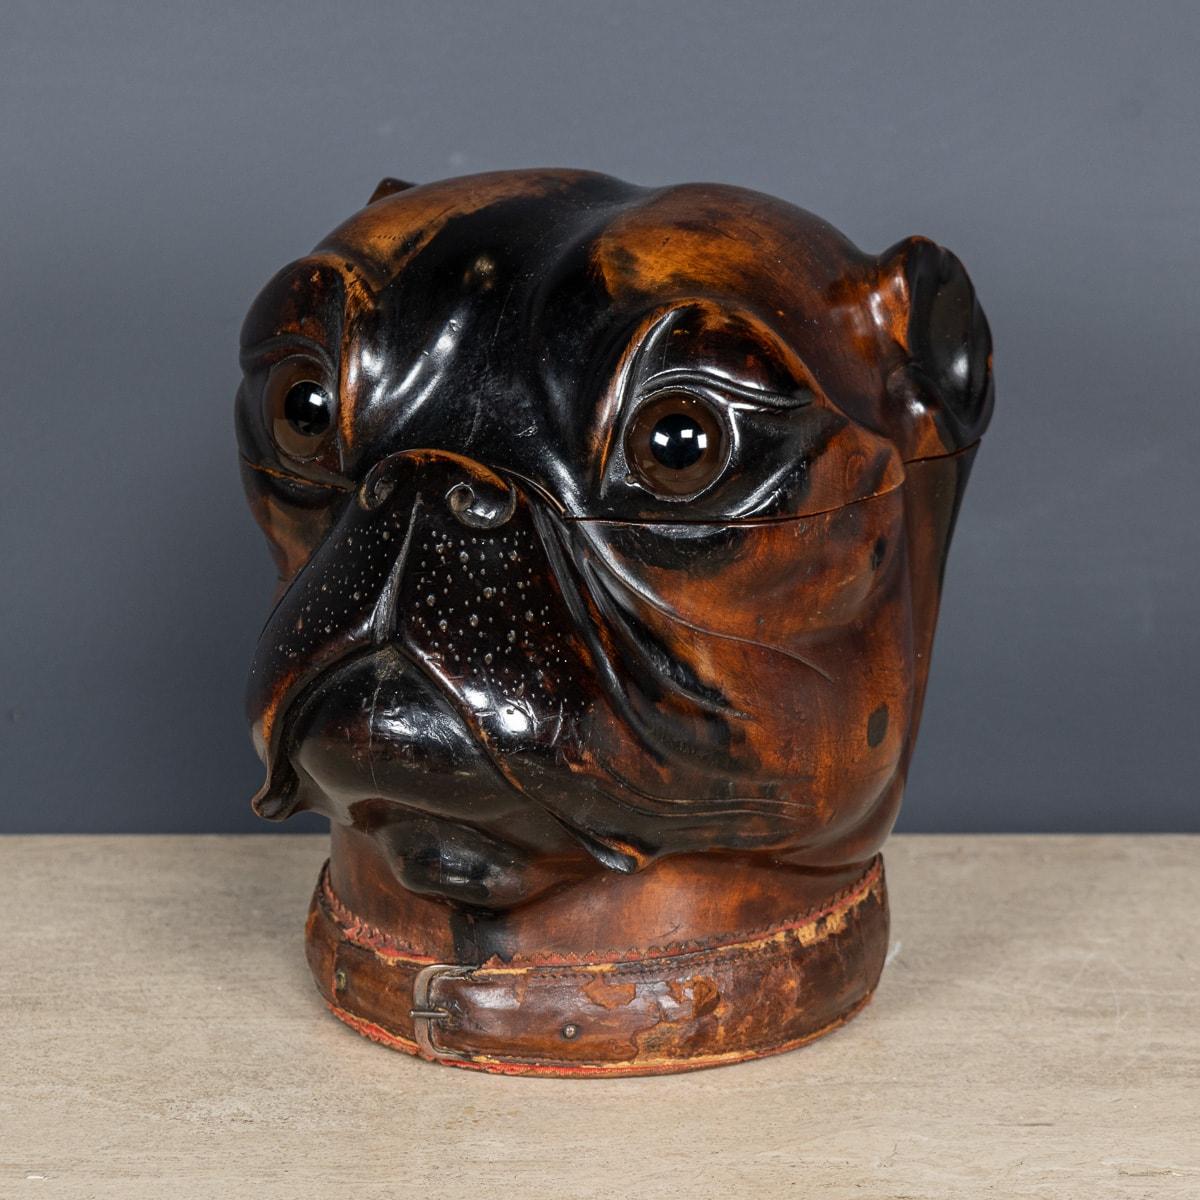 Antique early-20th Century Victorian lignum vitae tobacco jar carved in the form of a bulldog head. The detail is of exceptional quality, featuring large glass eyes and a leather collar around the base. It is lined on the inside with brass and has